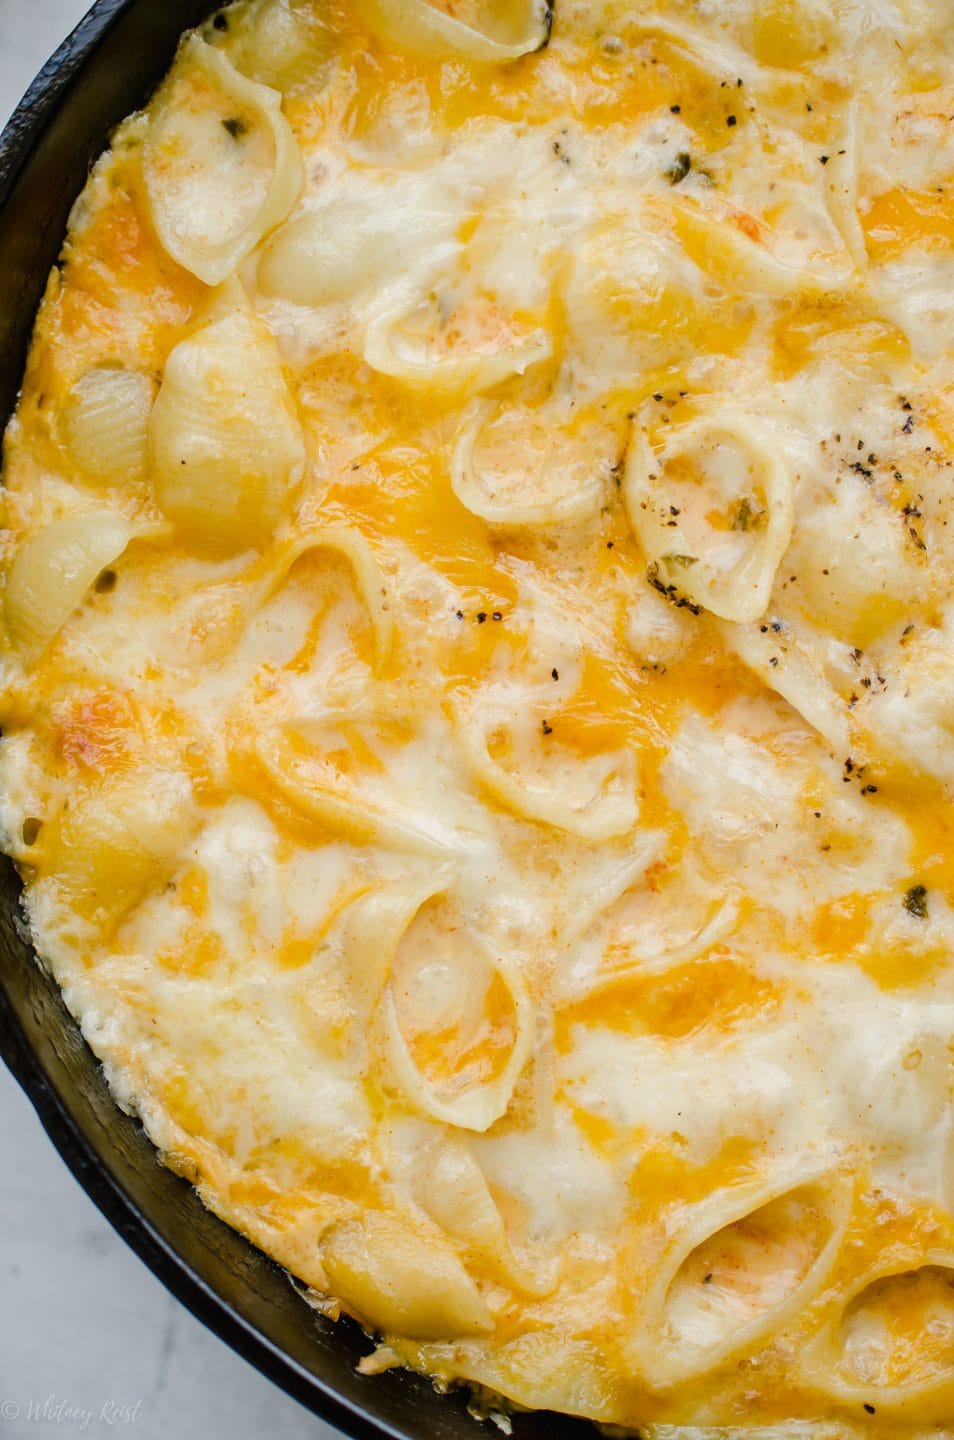 A close up shot to show the texture of a baked mac and cheese in a cast iron skillet.